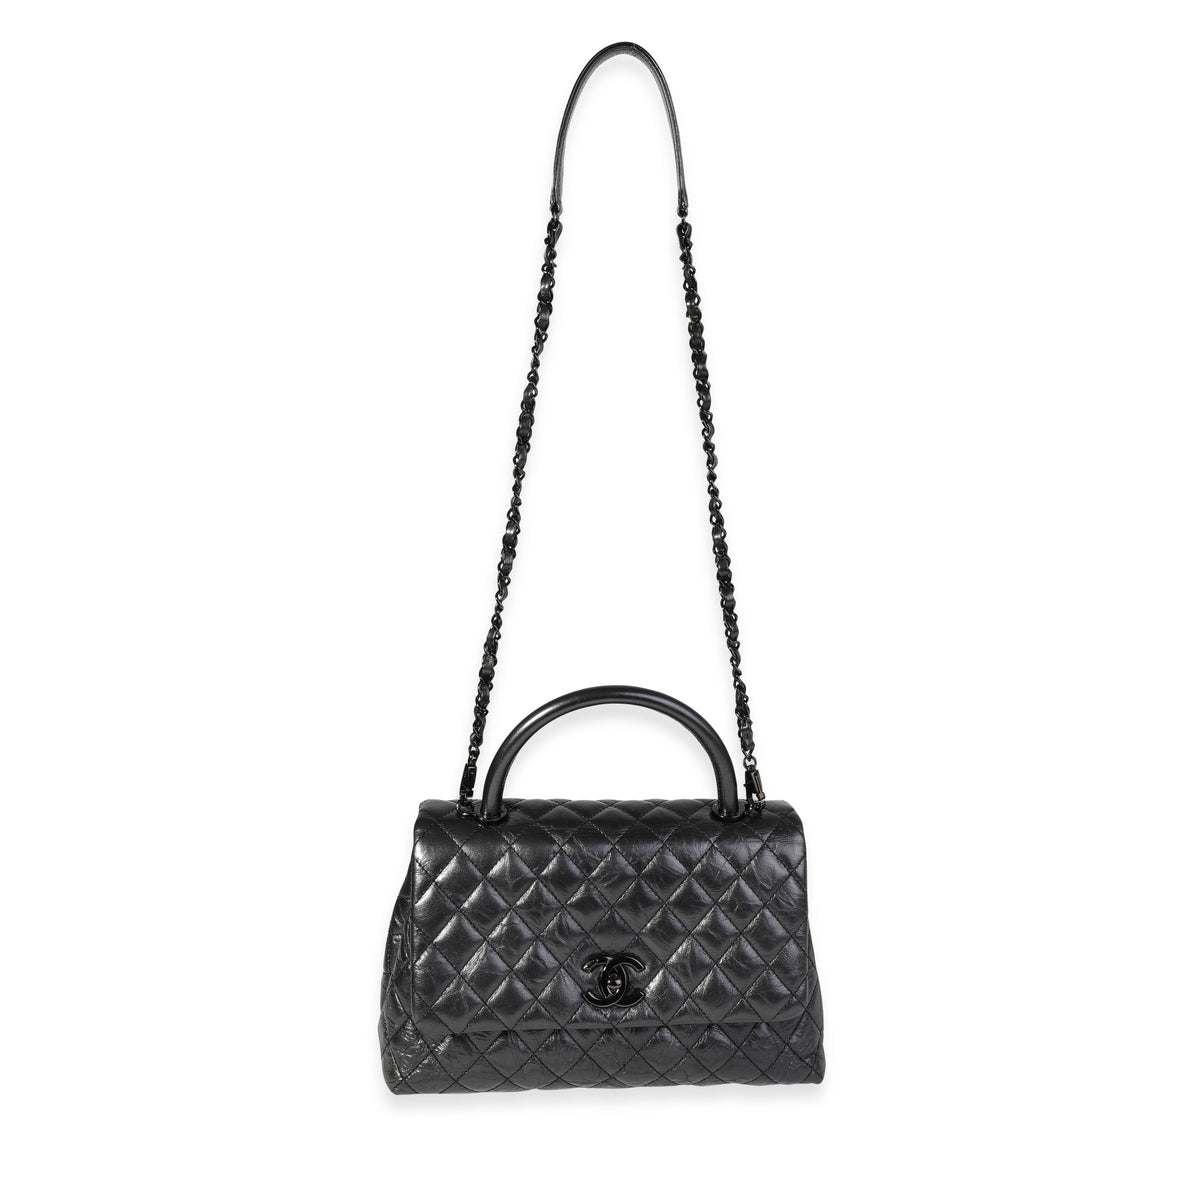 Chanel Gunmetal Quilted Aged Calfskin Medium Coco Top Handle Bag